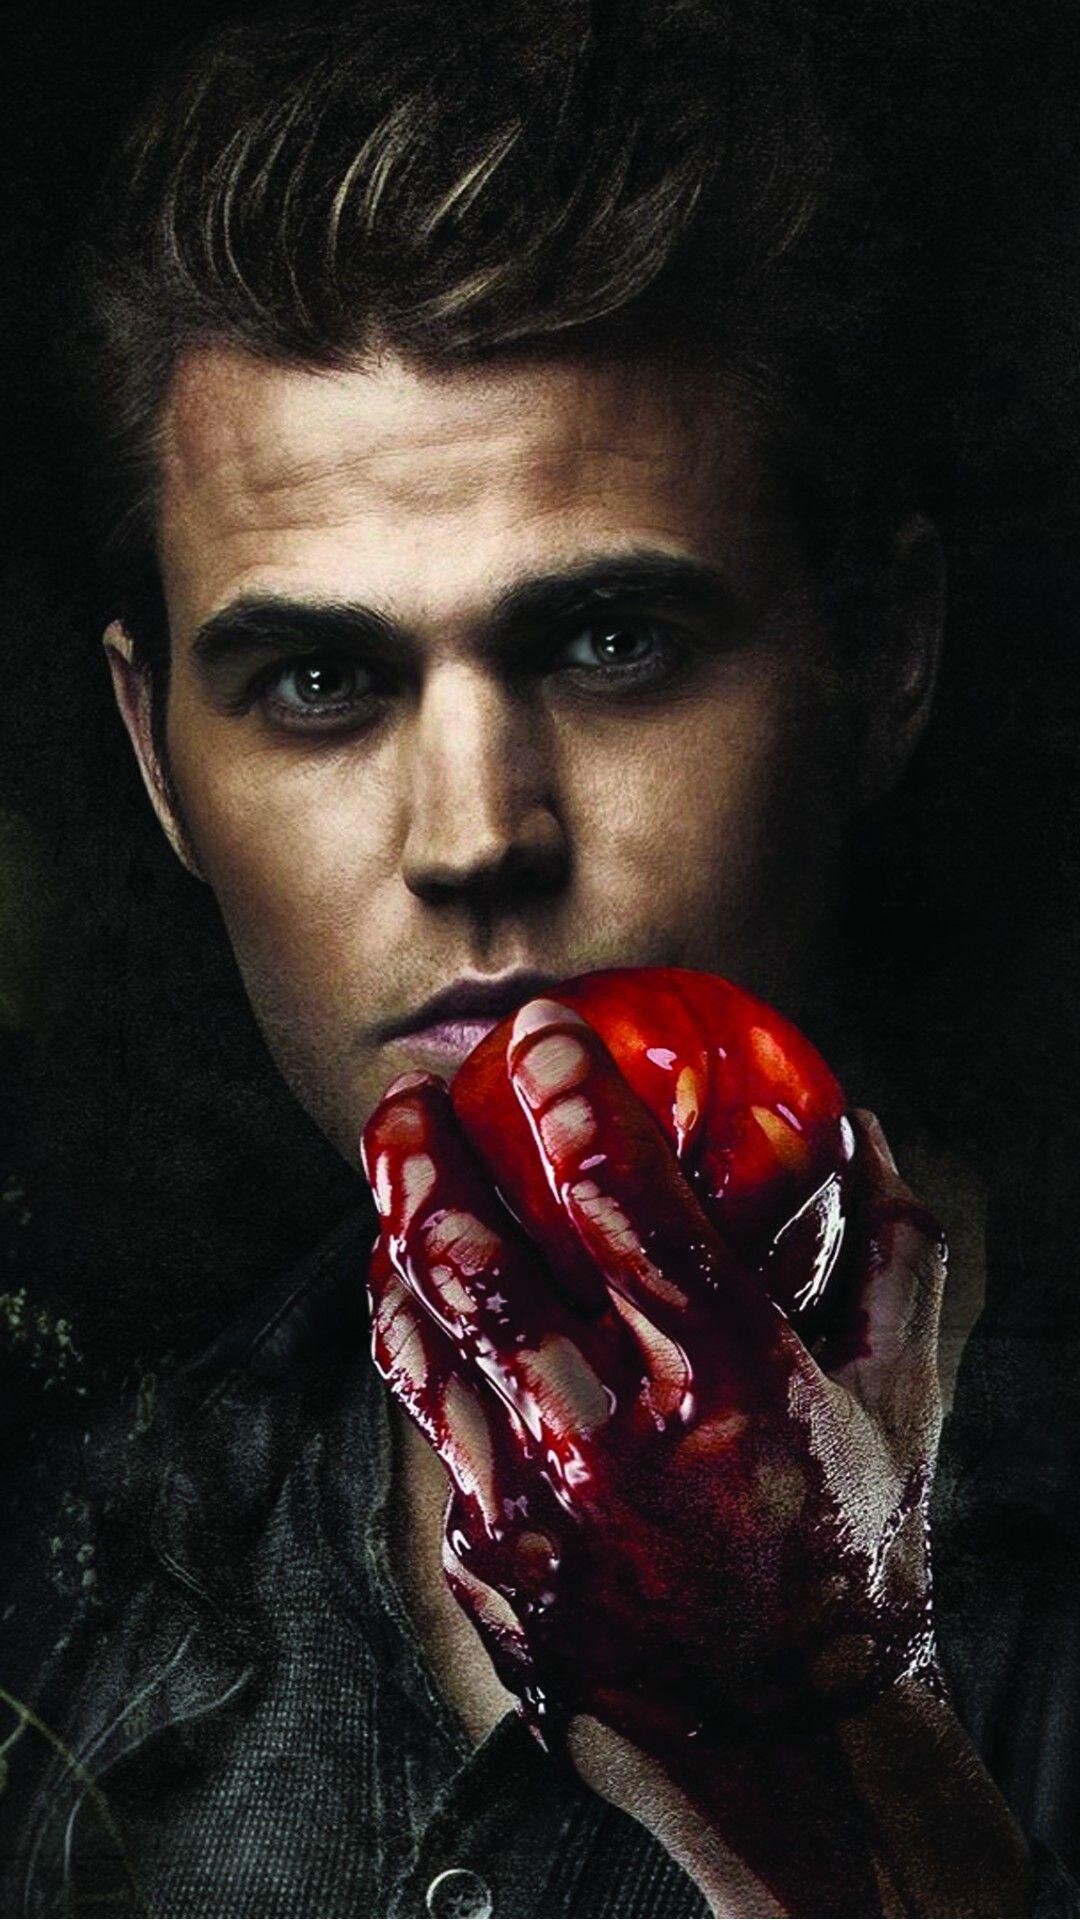 The Vampire Diaries (TV Series): Enzo, Bleeding Apple, Paul Wesley, Stefan Salvatore, When It Comes To Family Nothing Is Thicker Than Blood. 1080x1920 Full HD Wallpaper.